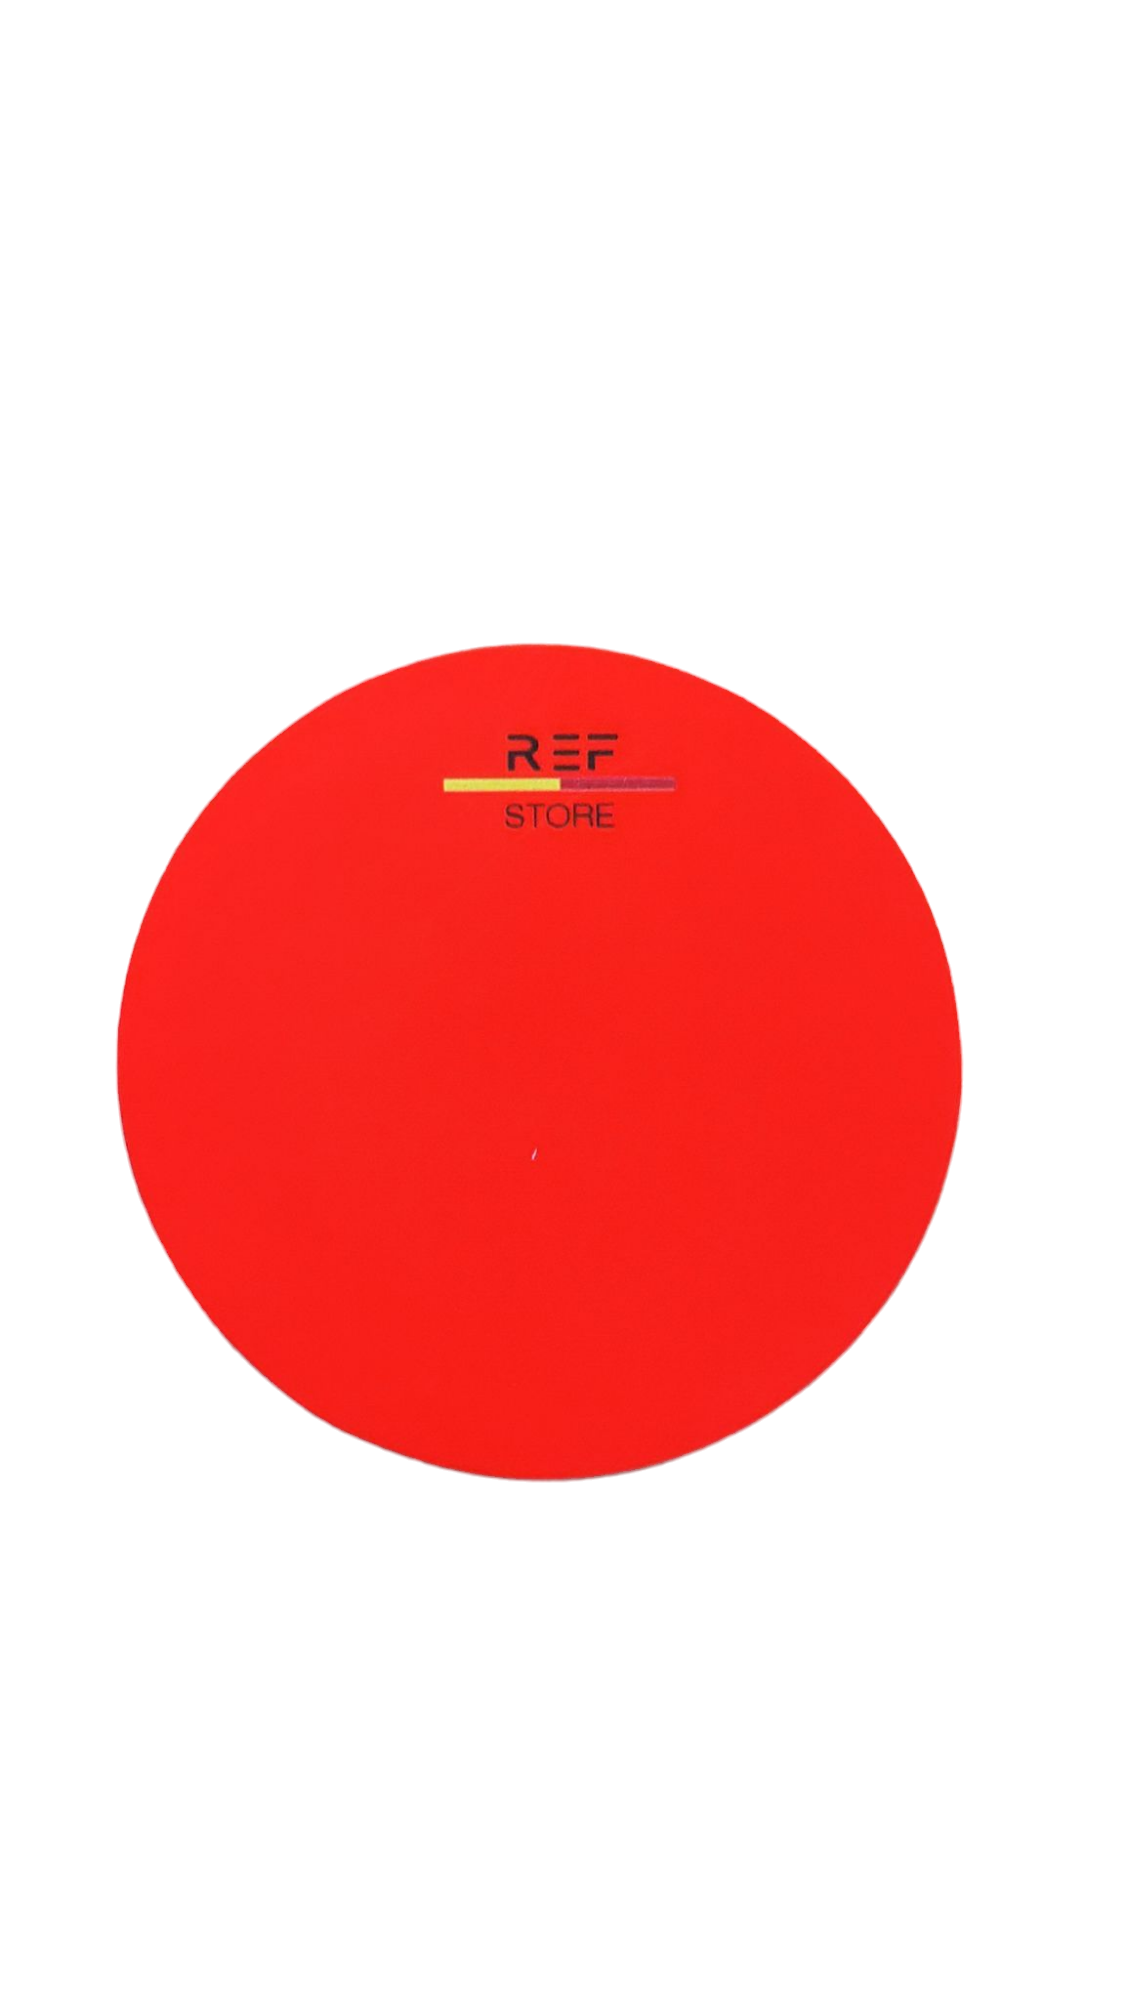 Red Card Circle (RefStore)